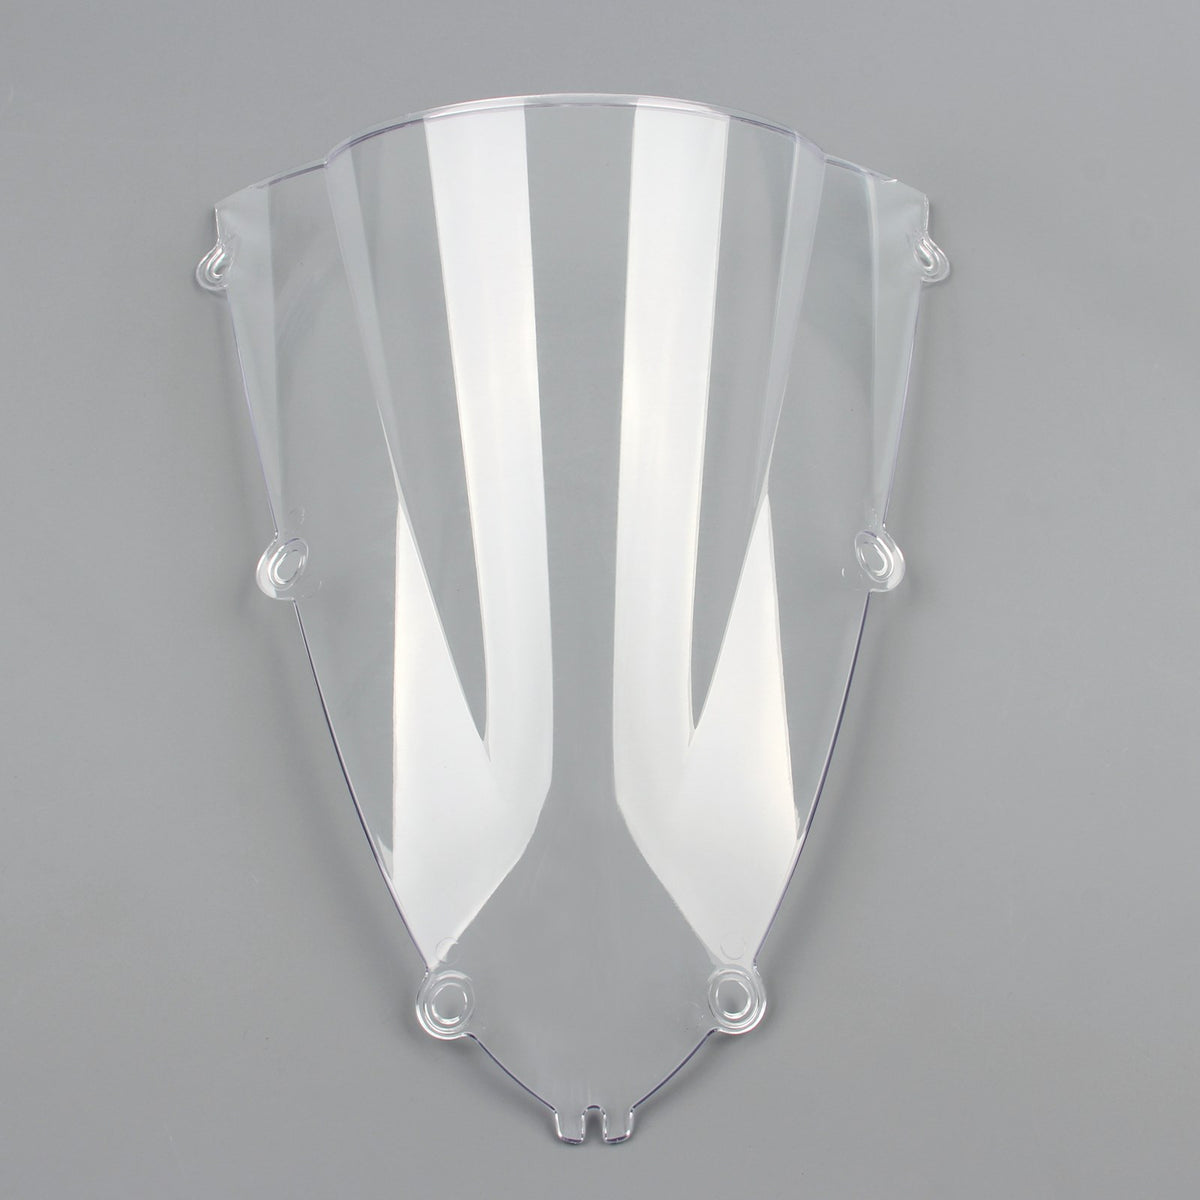 Windshield Windscreen Double Bubble For Yamaha YZFR1 1998-1999 YZF 1000 R1 Clear